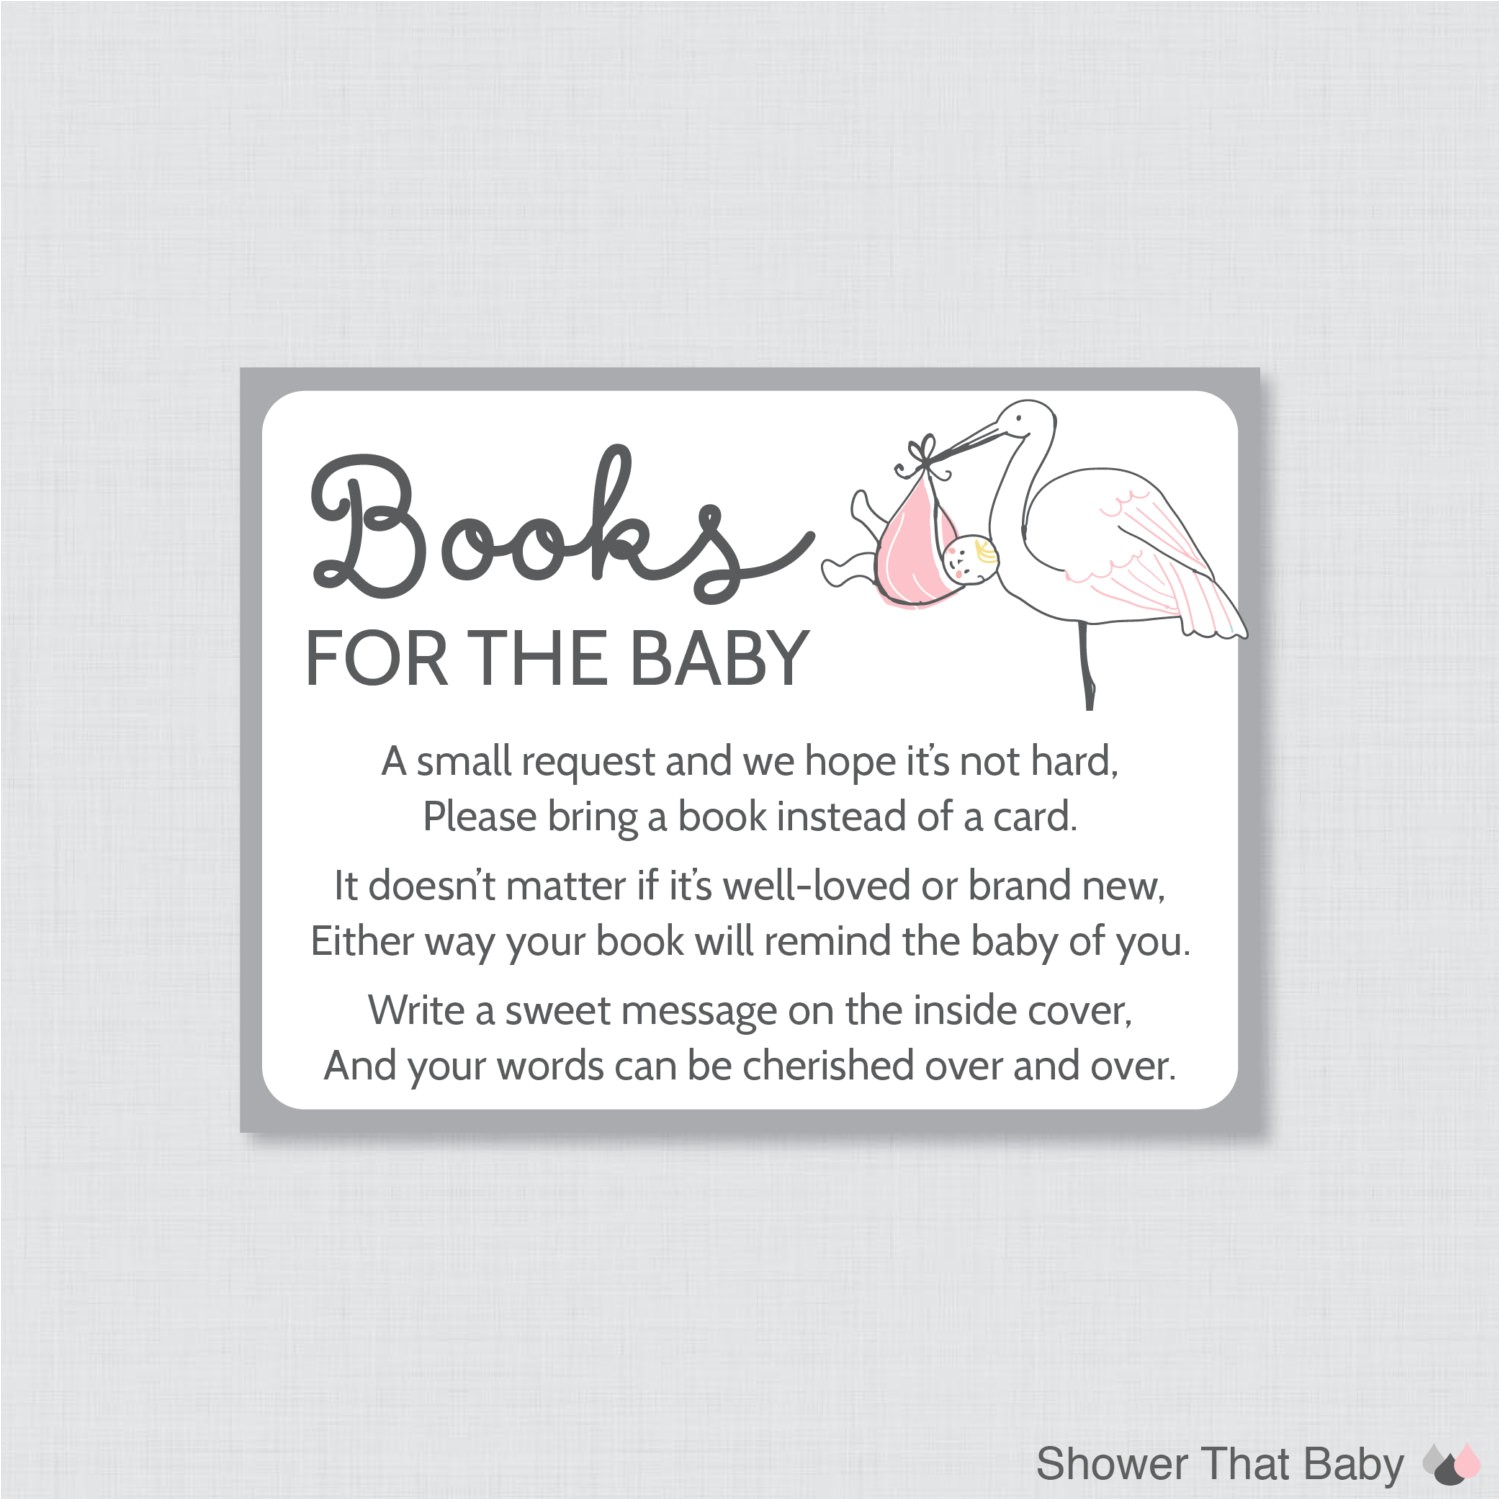 Baby Shower Invitations Books Instead Of Cards Stork Baby Shower Bring A Book Instead Of A Card Invitation